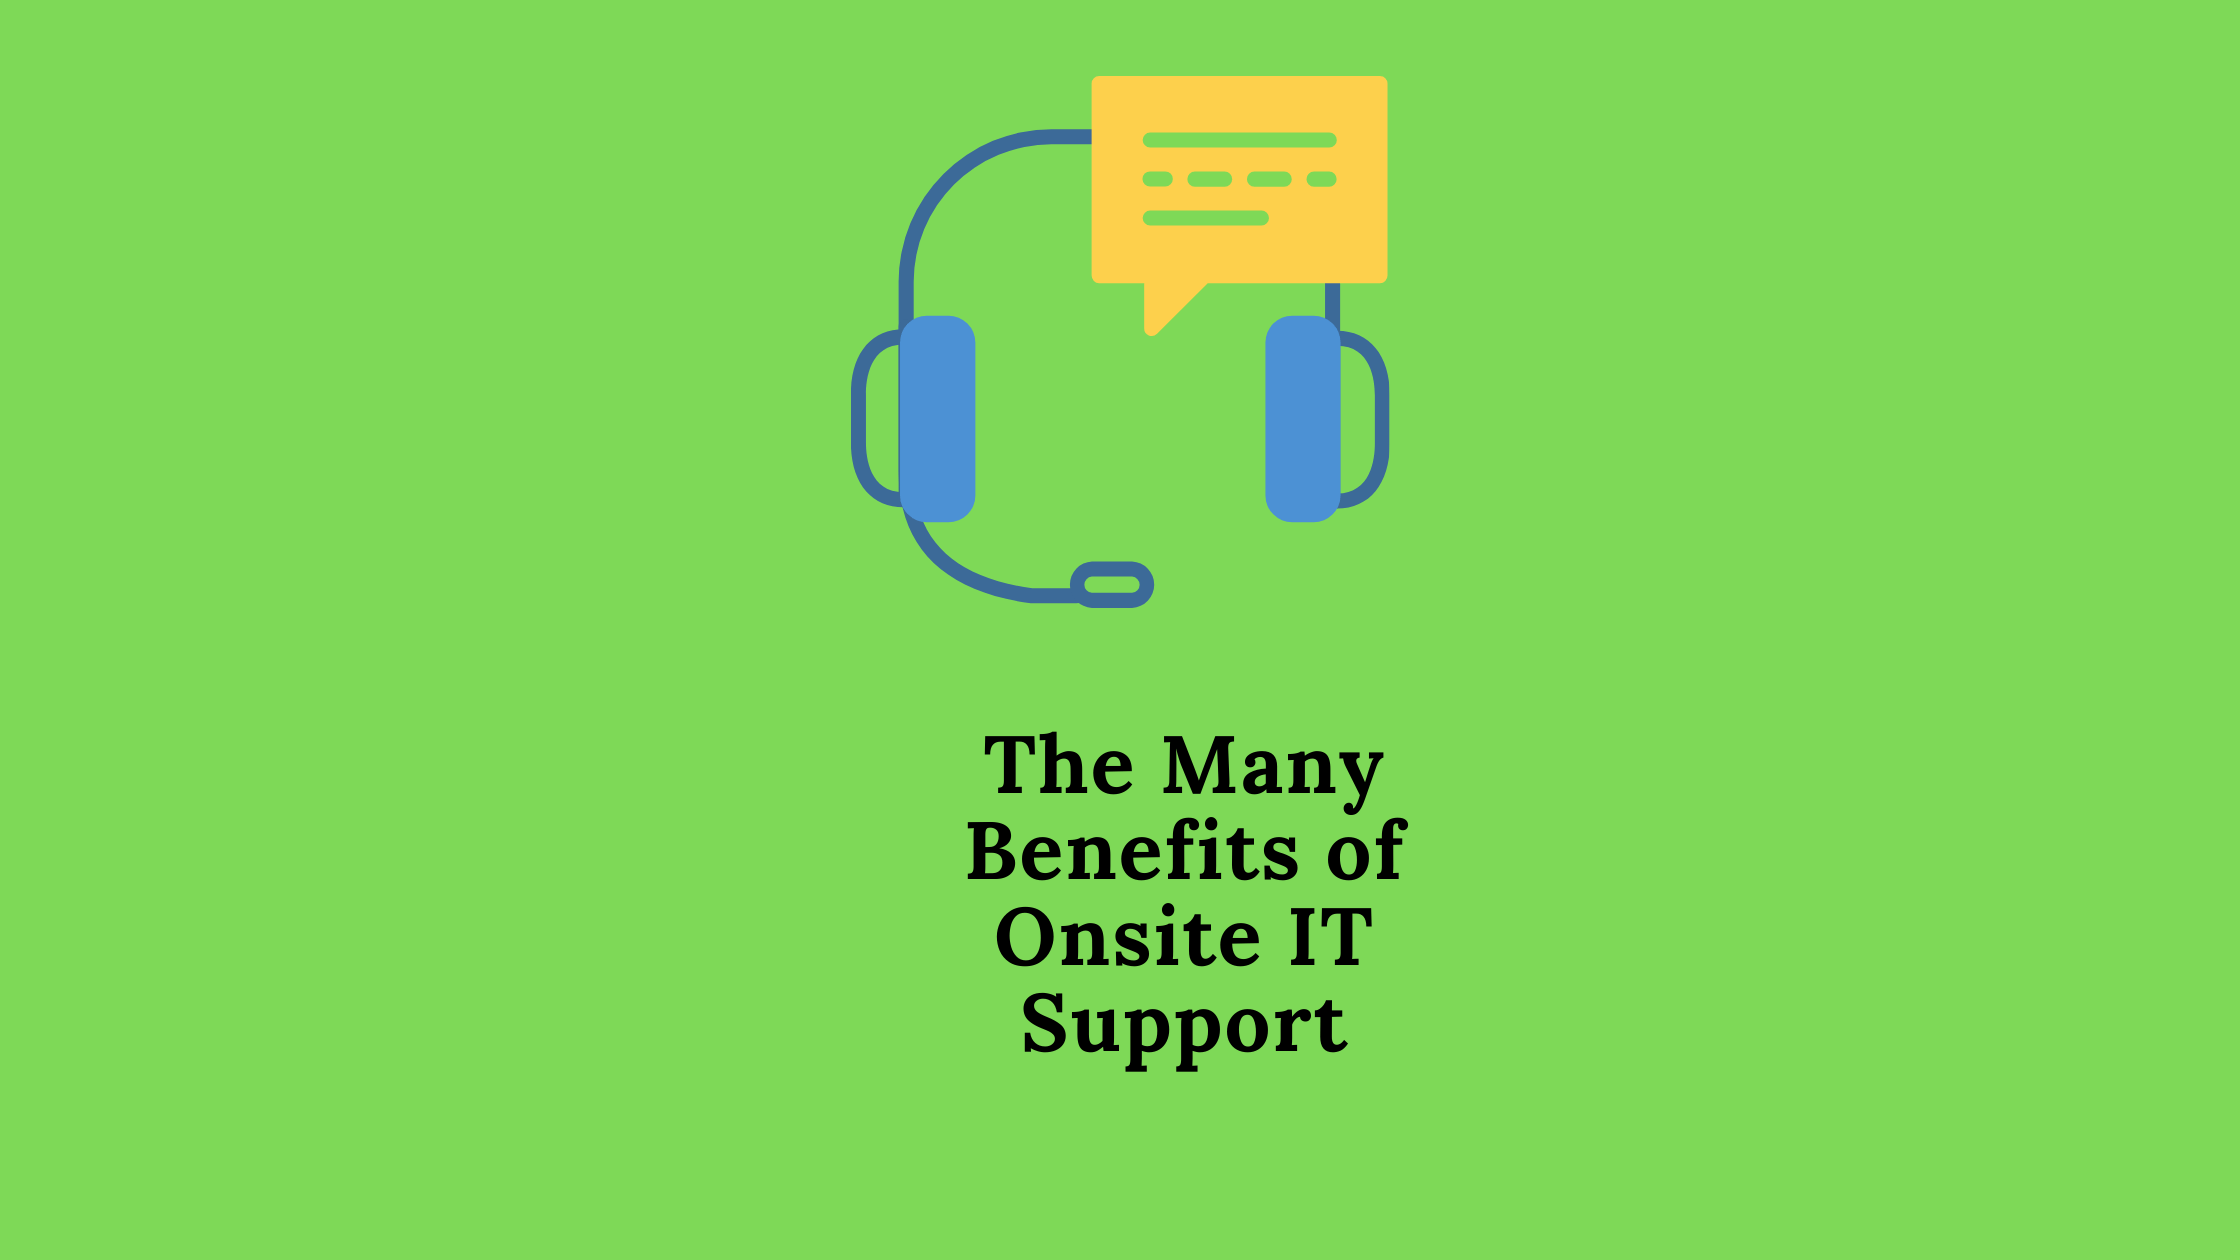 The Many Benefits of Onsite IT Support